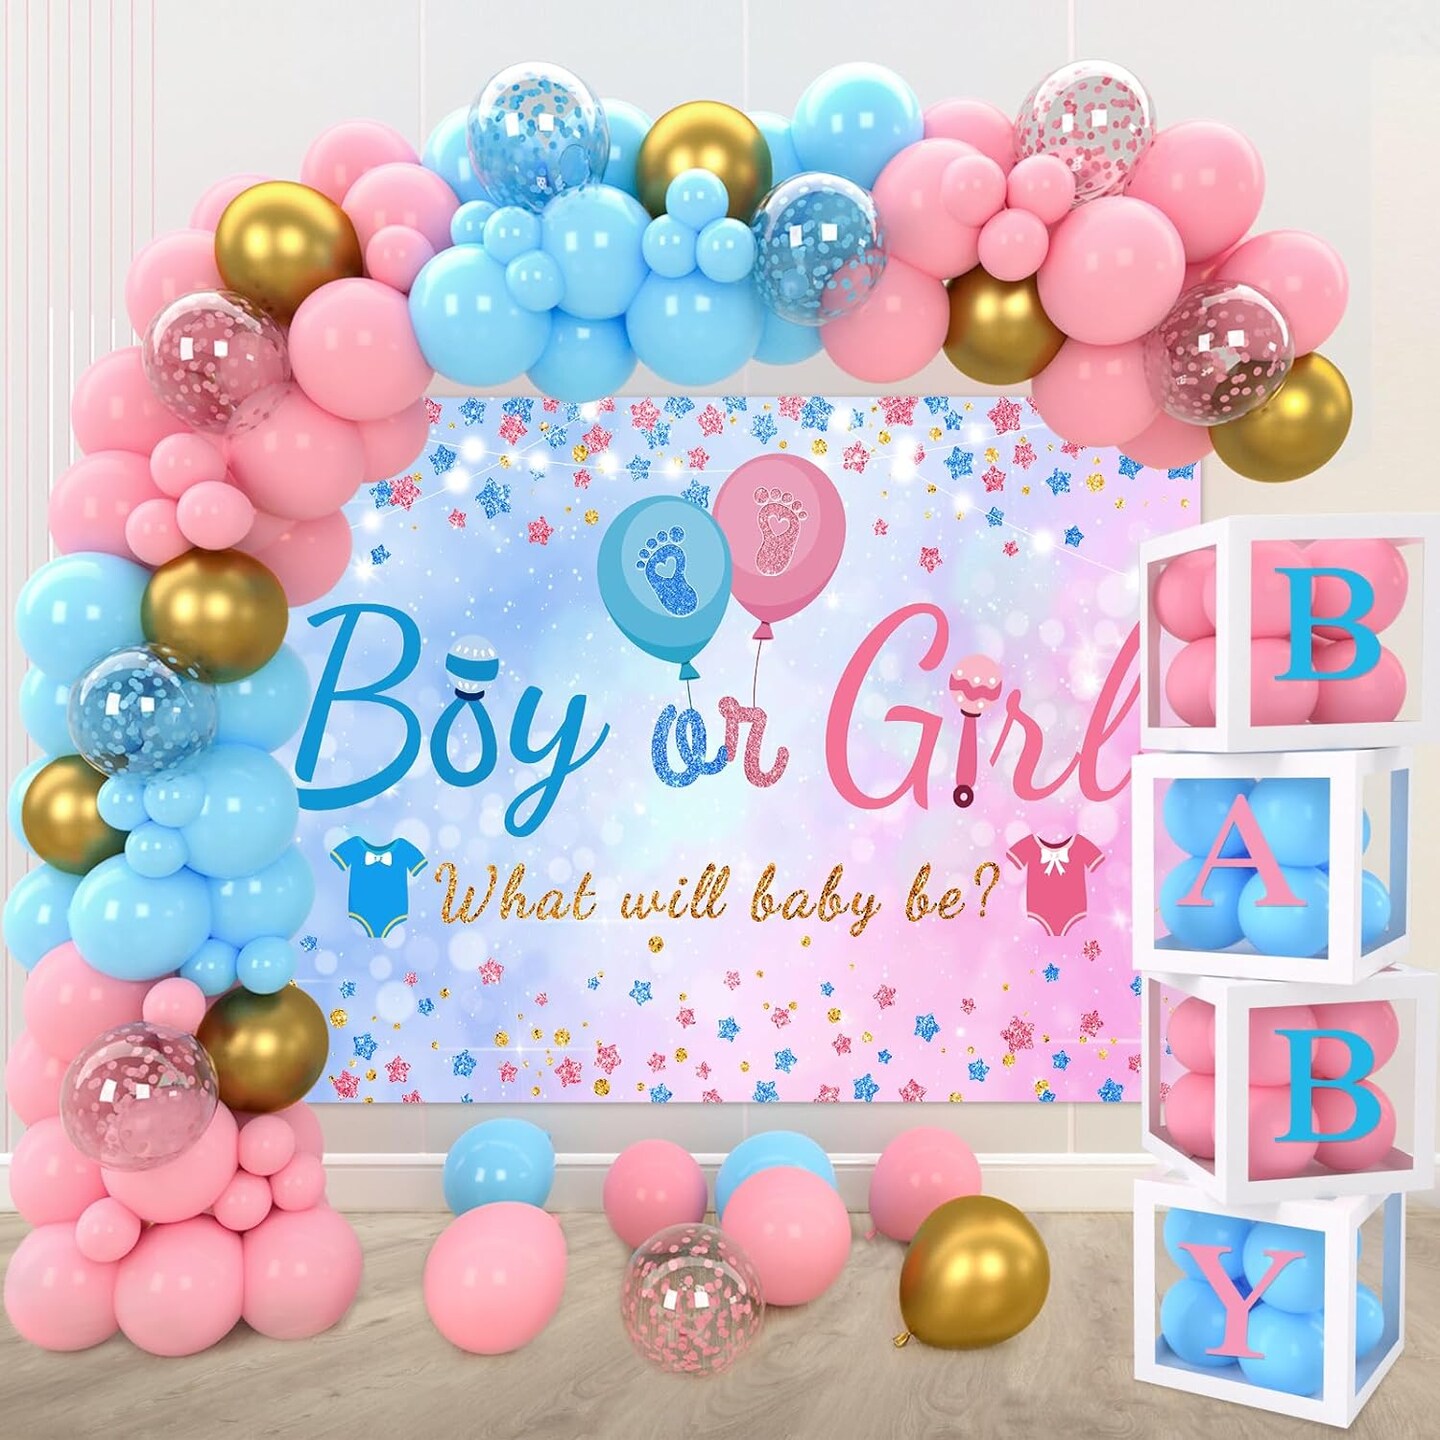 Gender Reveal Baby Balloon Boxes Decorations, Pink Blue Balloon Arch Garland Kits With 4pcs Baby Boxes, Gender Reveal Backdrop for Baby Shower,Boy or Girl gender Reveal Party Supplies(141pcs)